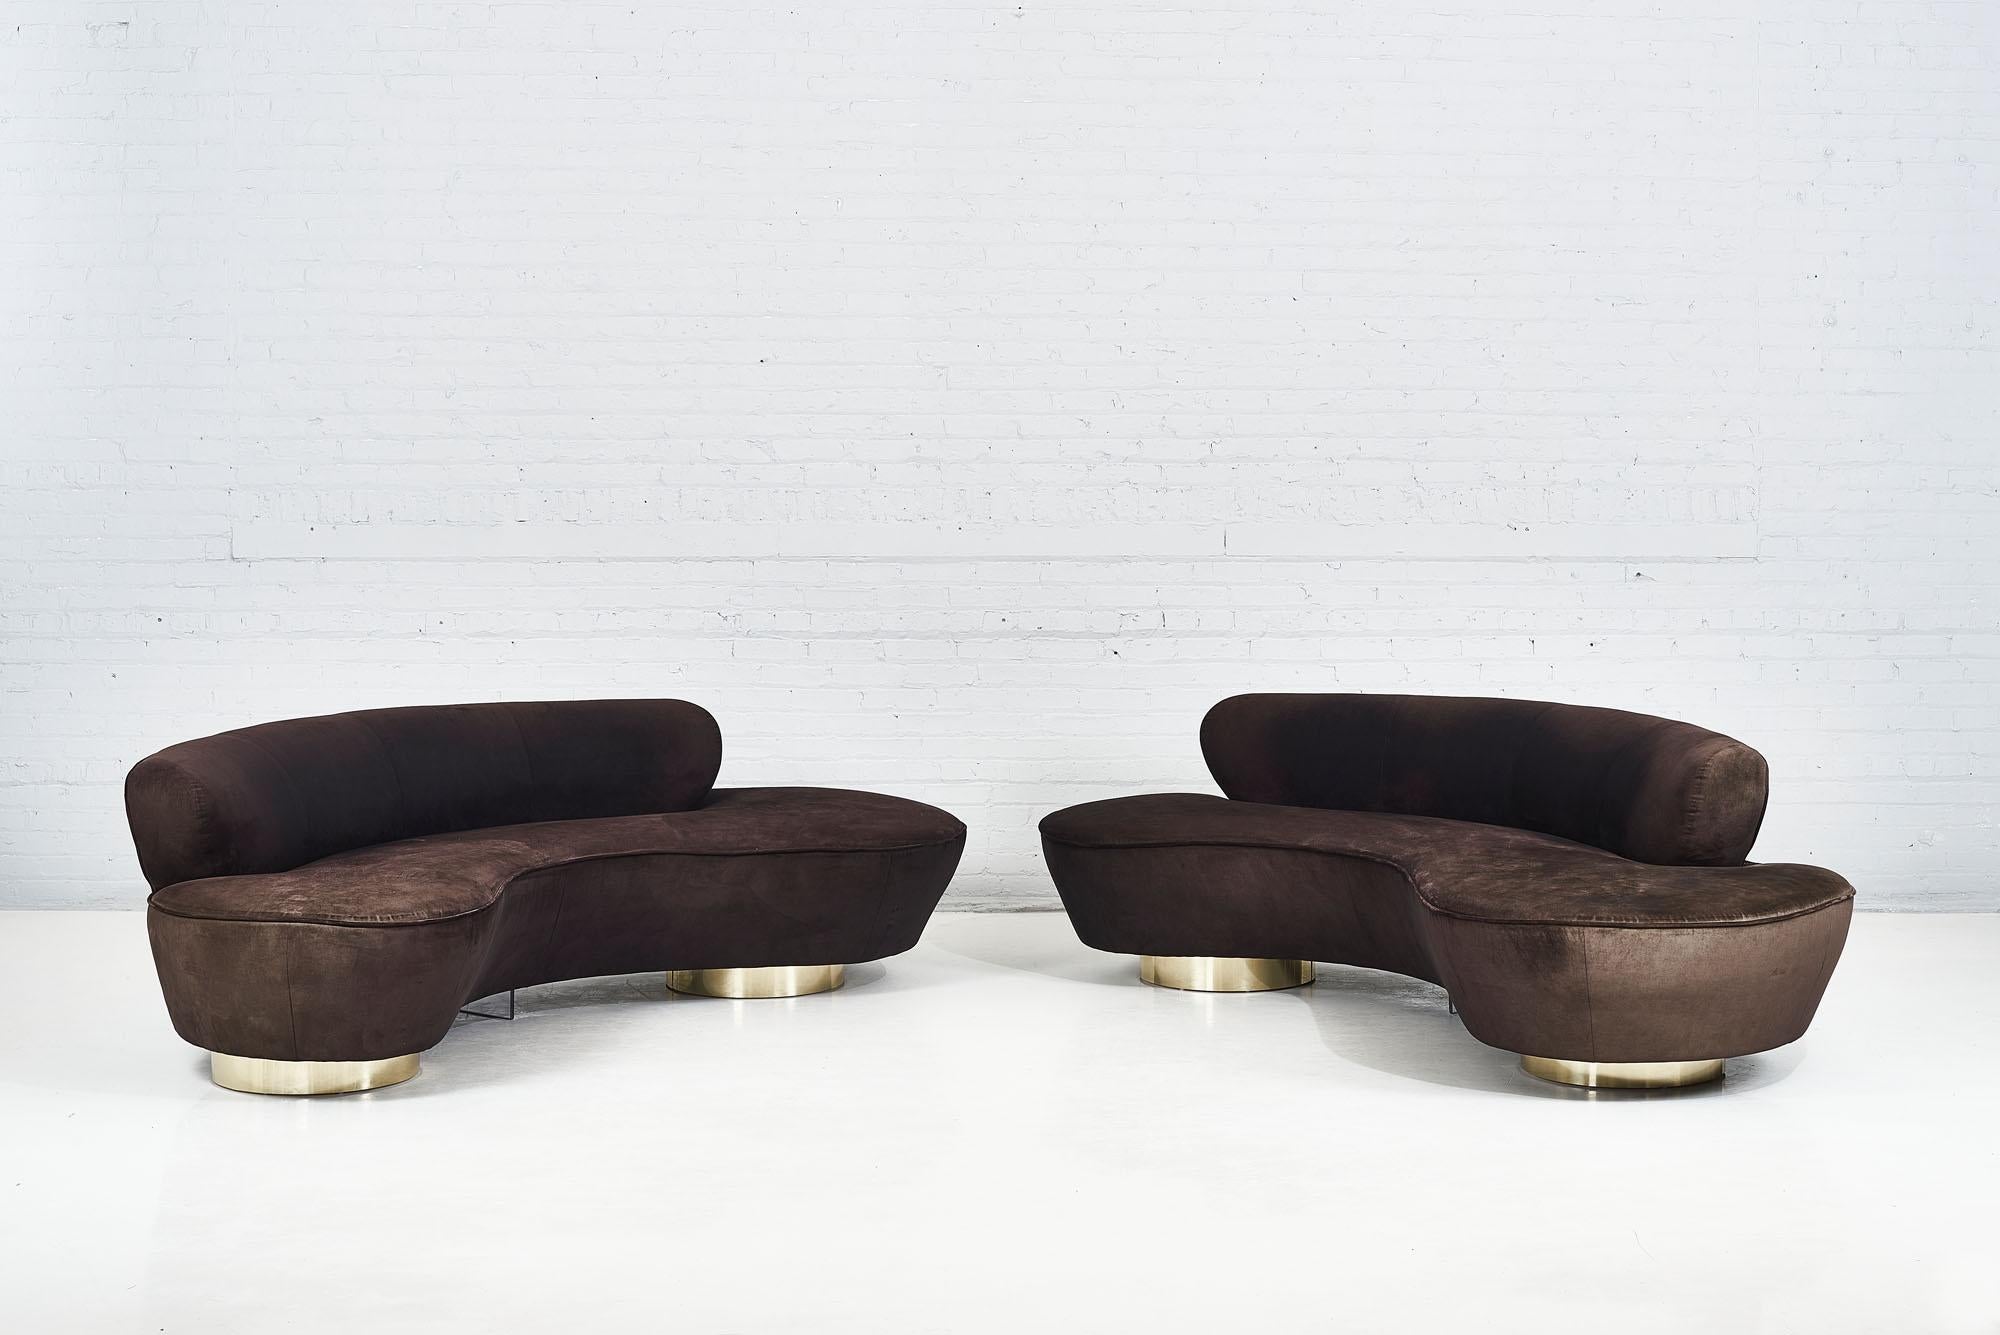 Pair of serpentine sofas designed by Vladimir Kagan for Directional Furniture. Original brown micro velvet upholstery over brass bases. Original fabric shows minor wear and fading. Both sofas retain original Directional labels.

Priced